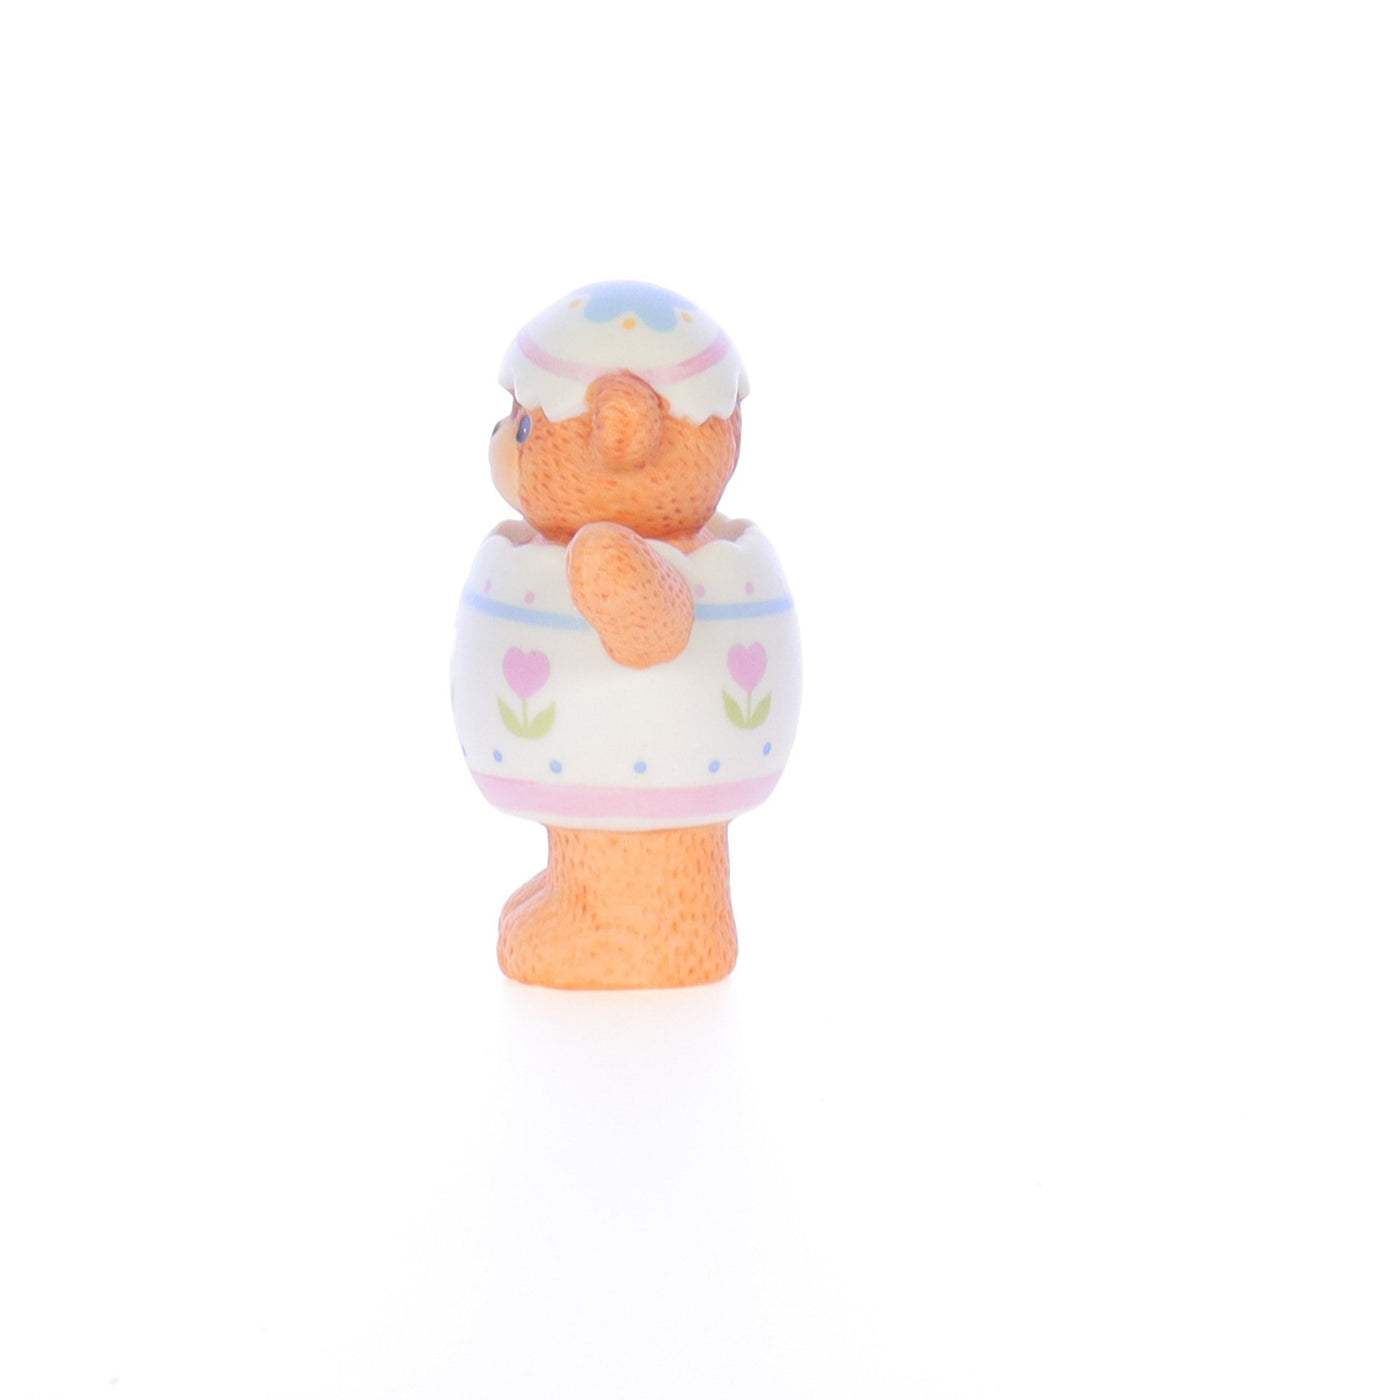 Lucy_And_Me_by_Lucy_Atwell_Porcelain_Figurine_Bear_in_Easter_Egg_Costume_Lucy_Unknown_056_03